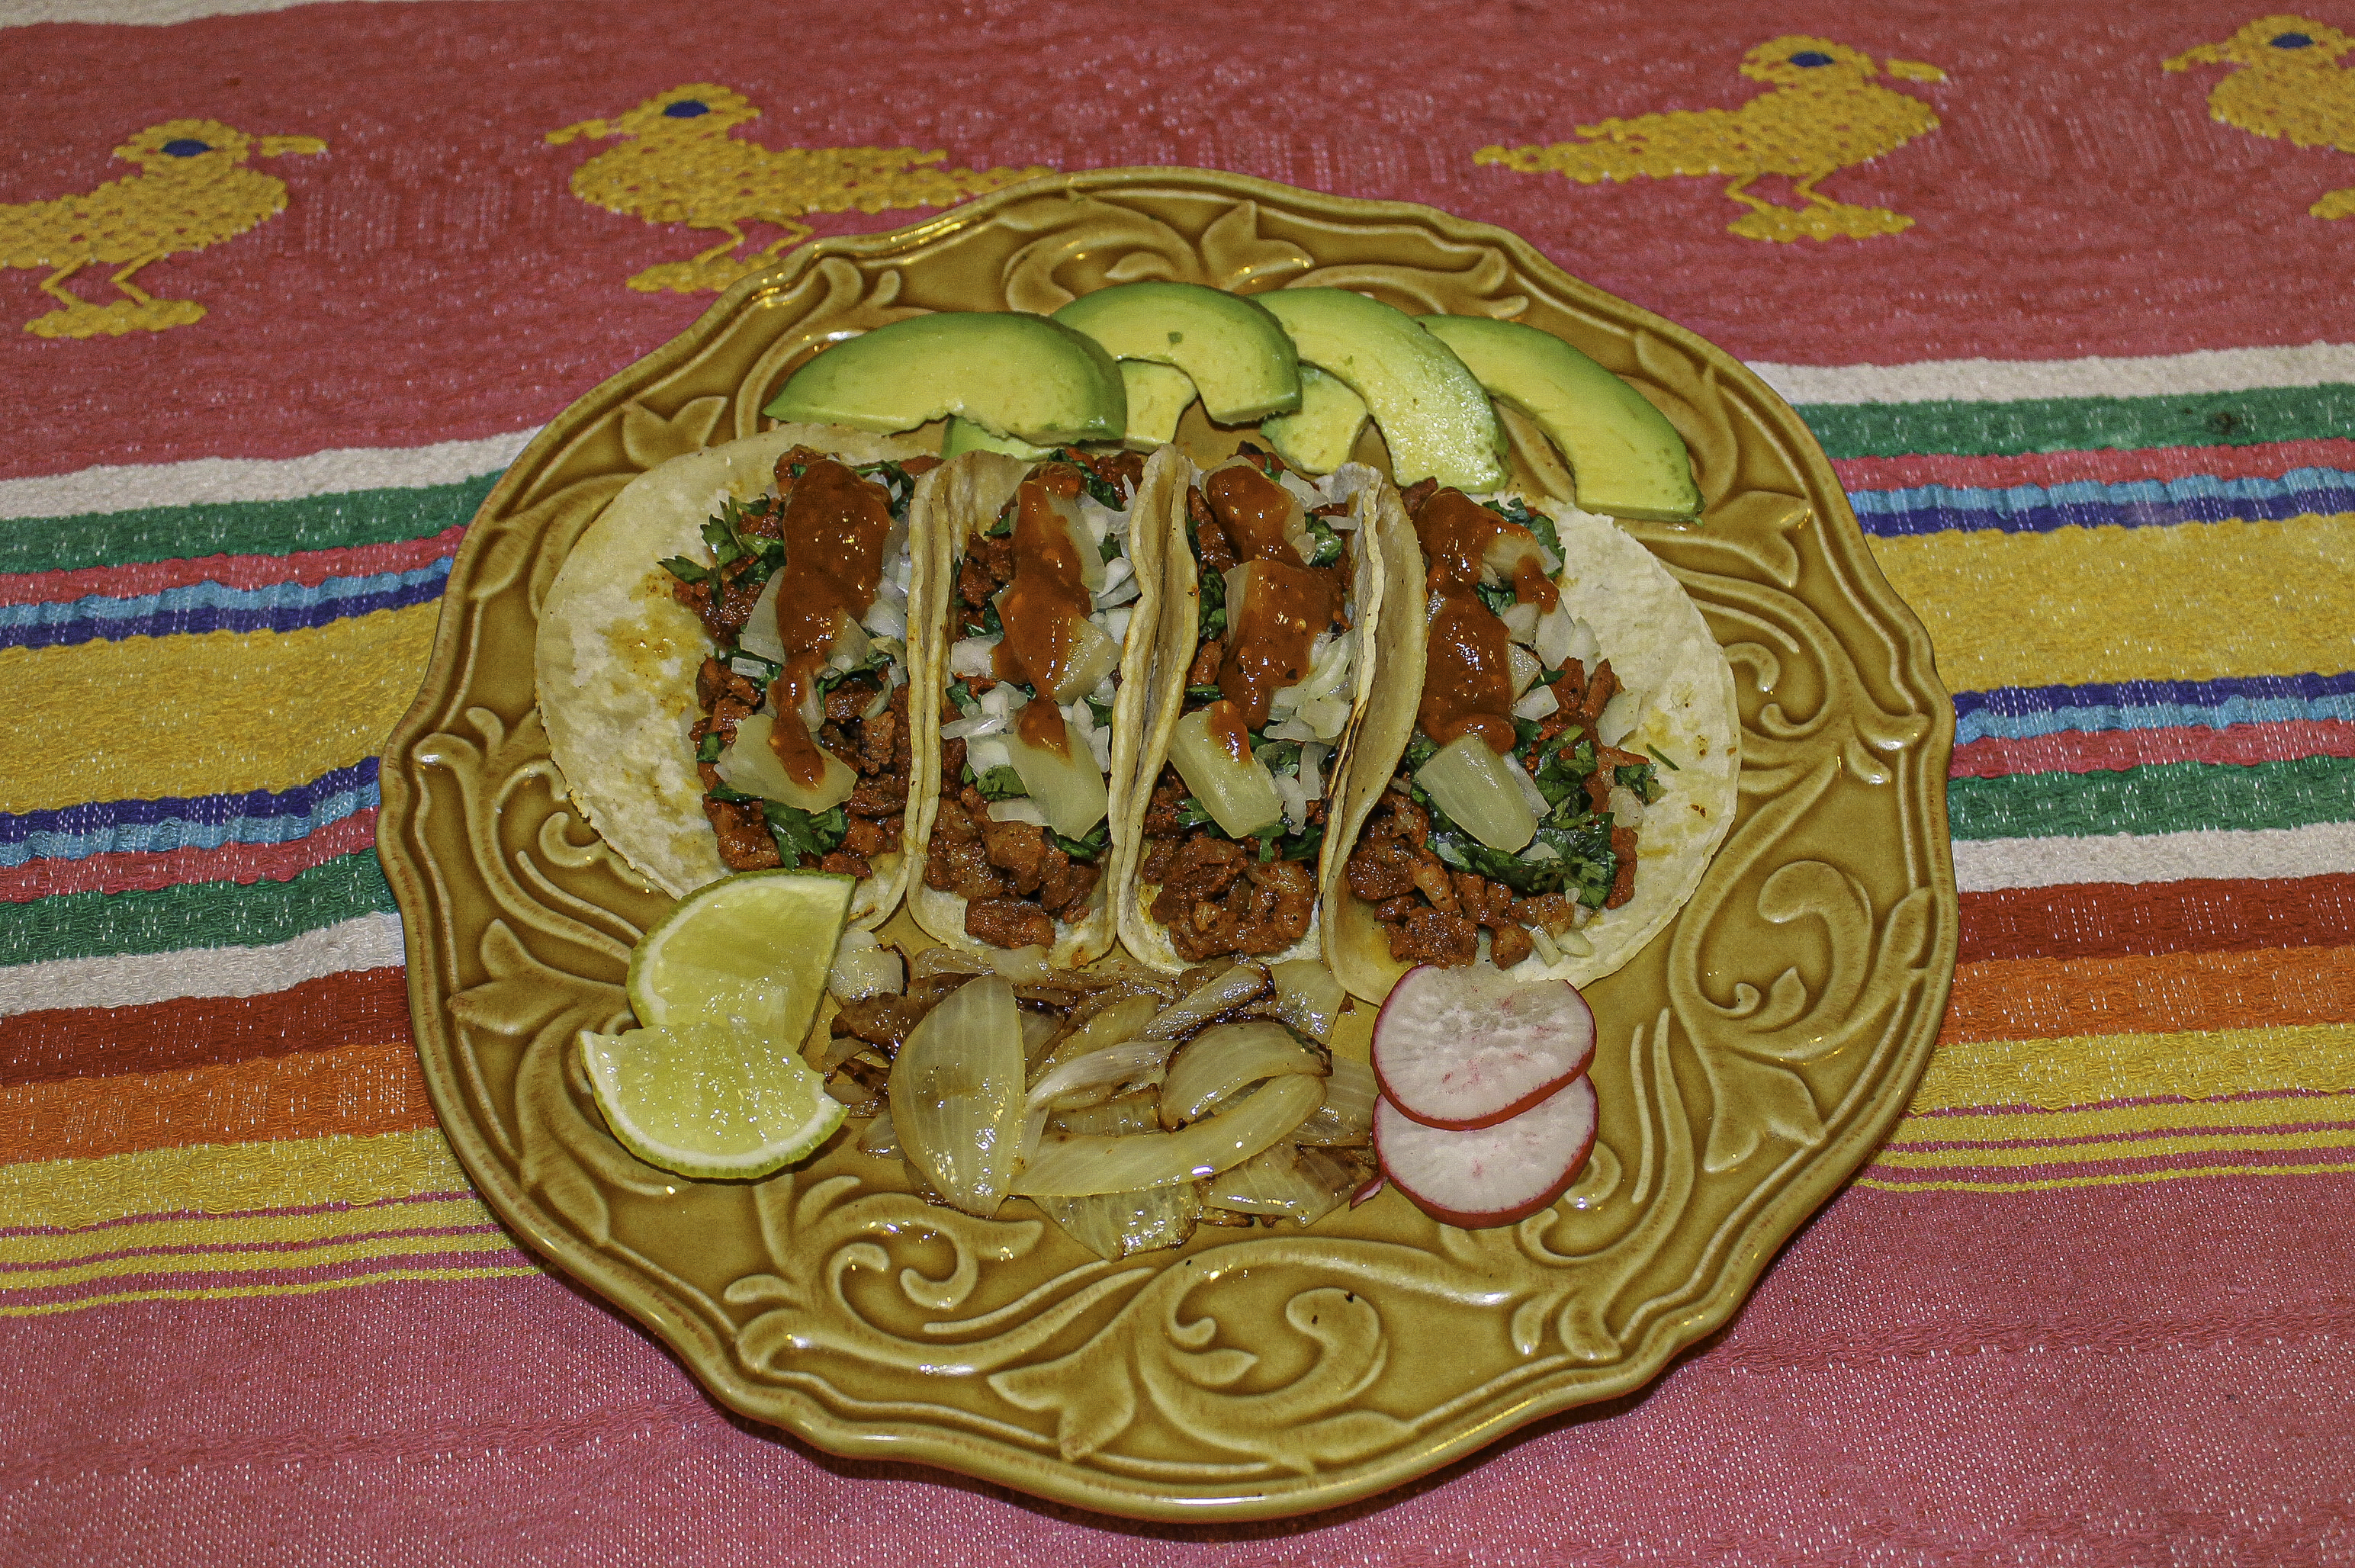 4 pork pastor tacos with limes, grilled onions, and radishes